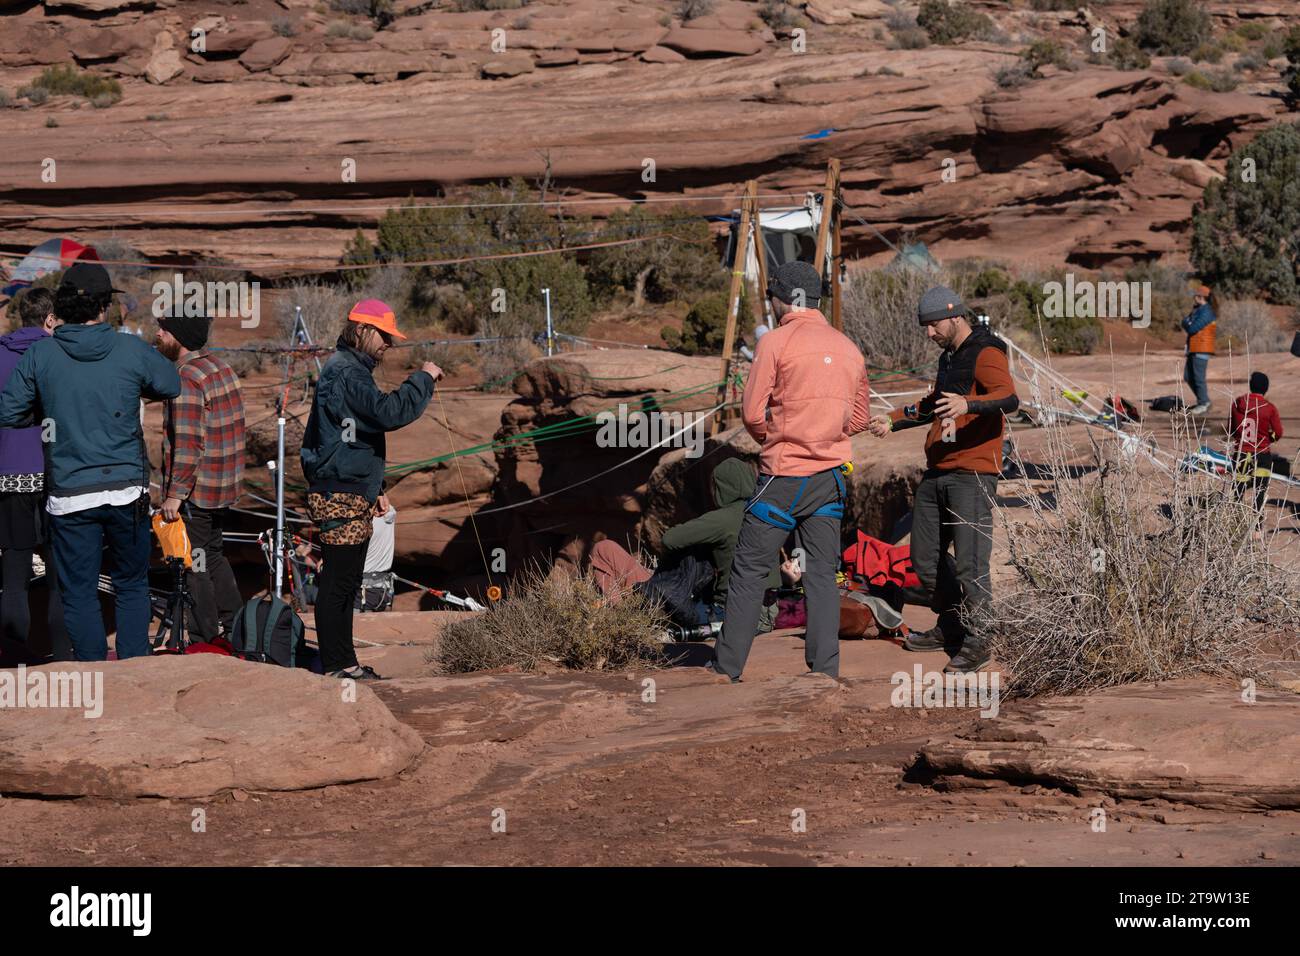 Participants in the GGBY World Highlining Festival practice yo-yoing when not walking the highlines.  Moab, Utah. Stock Photo